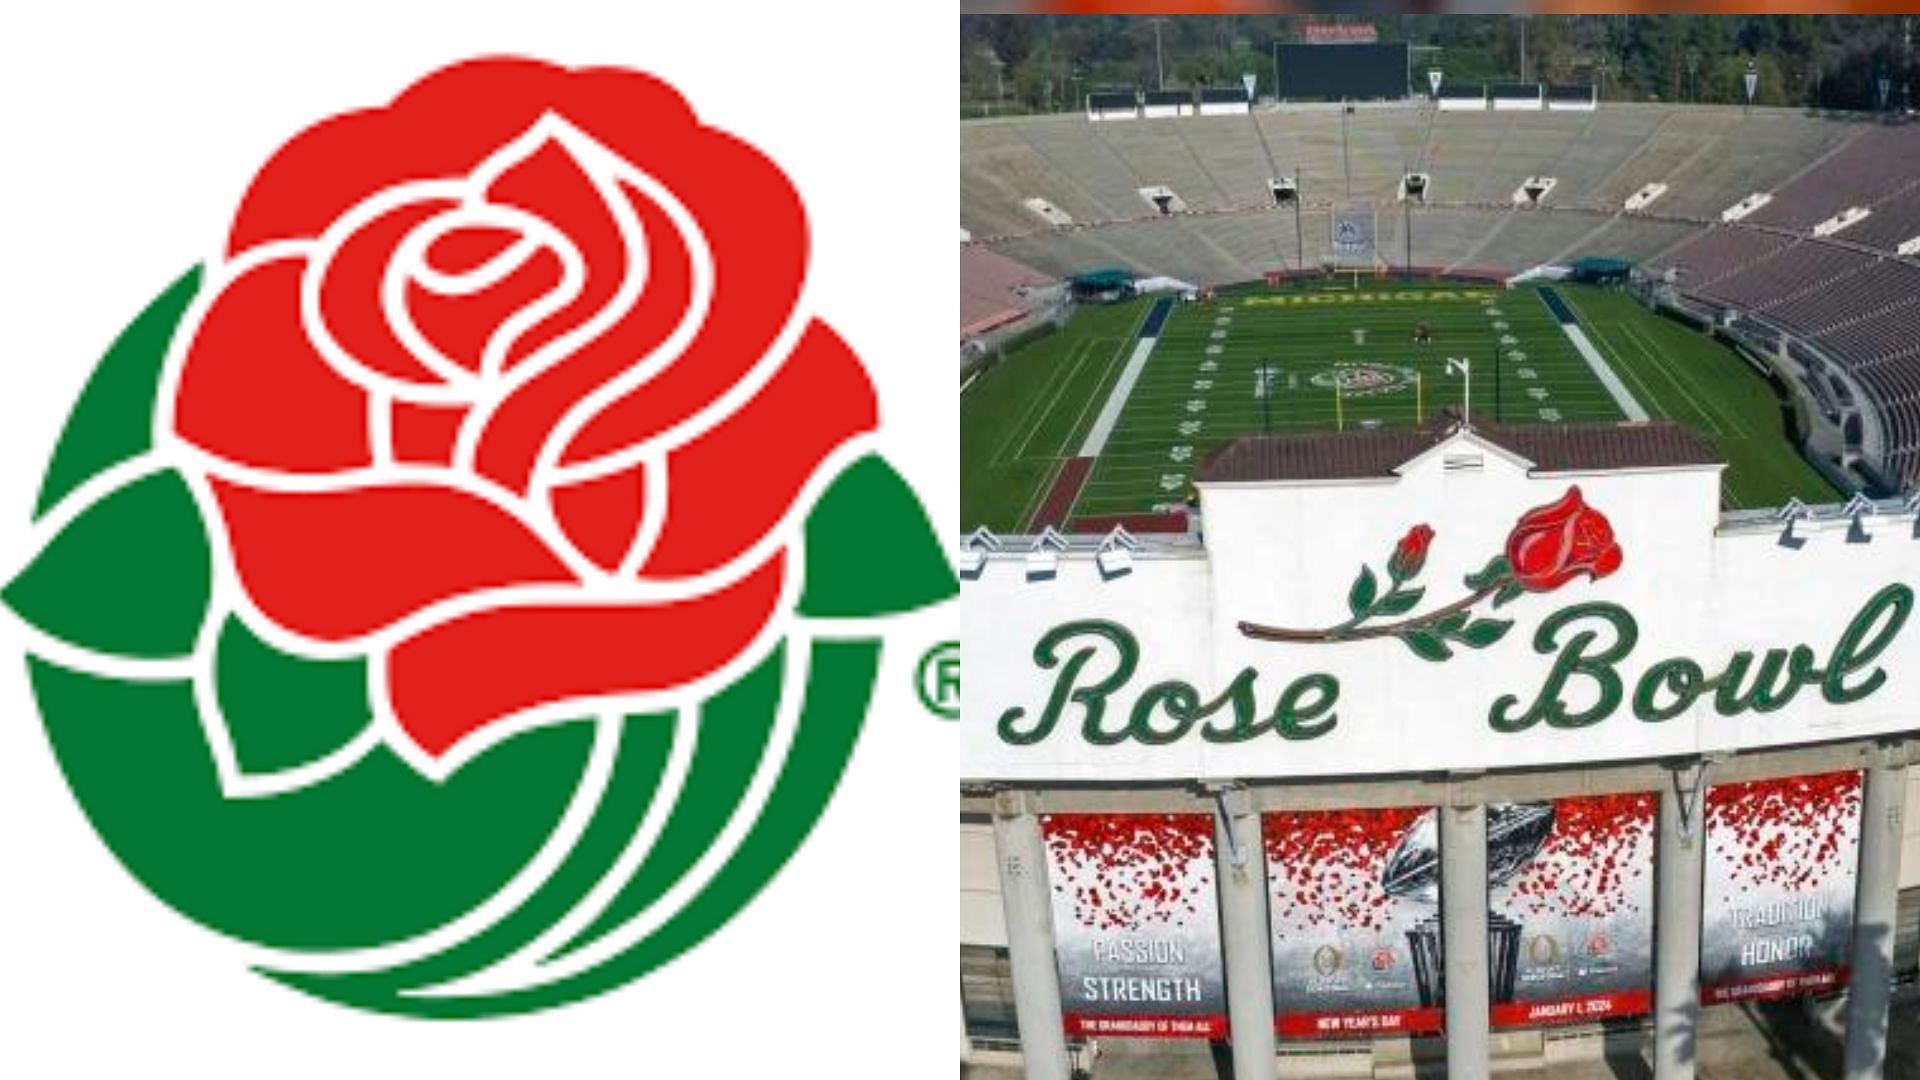 Why is Rose Bowl called the Rose Bowl?